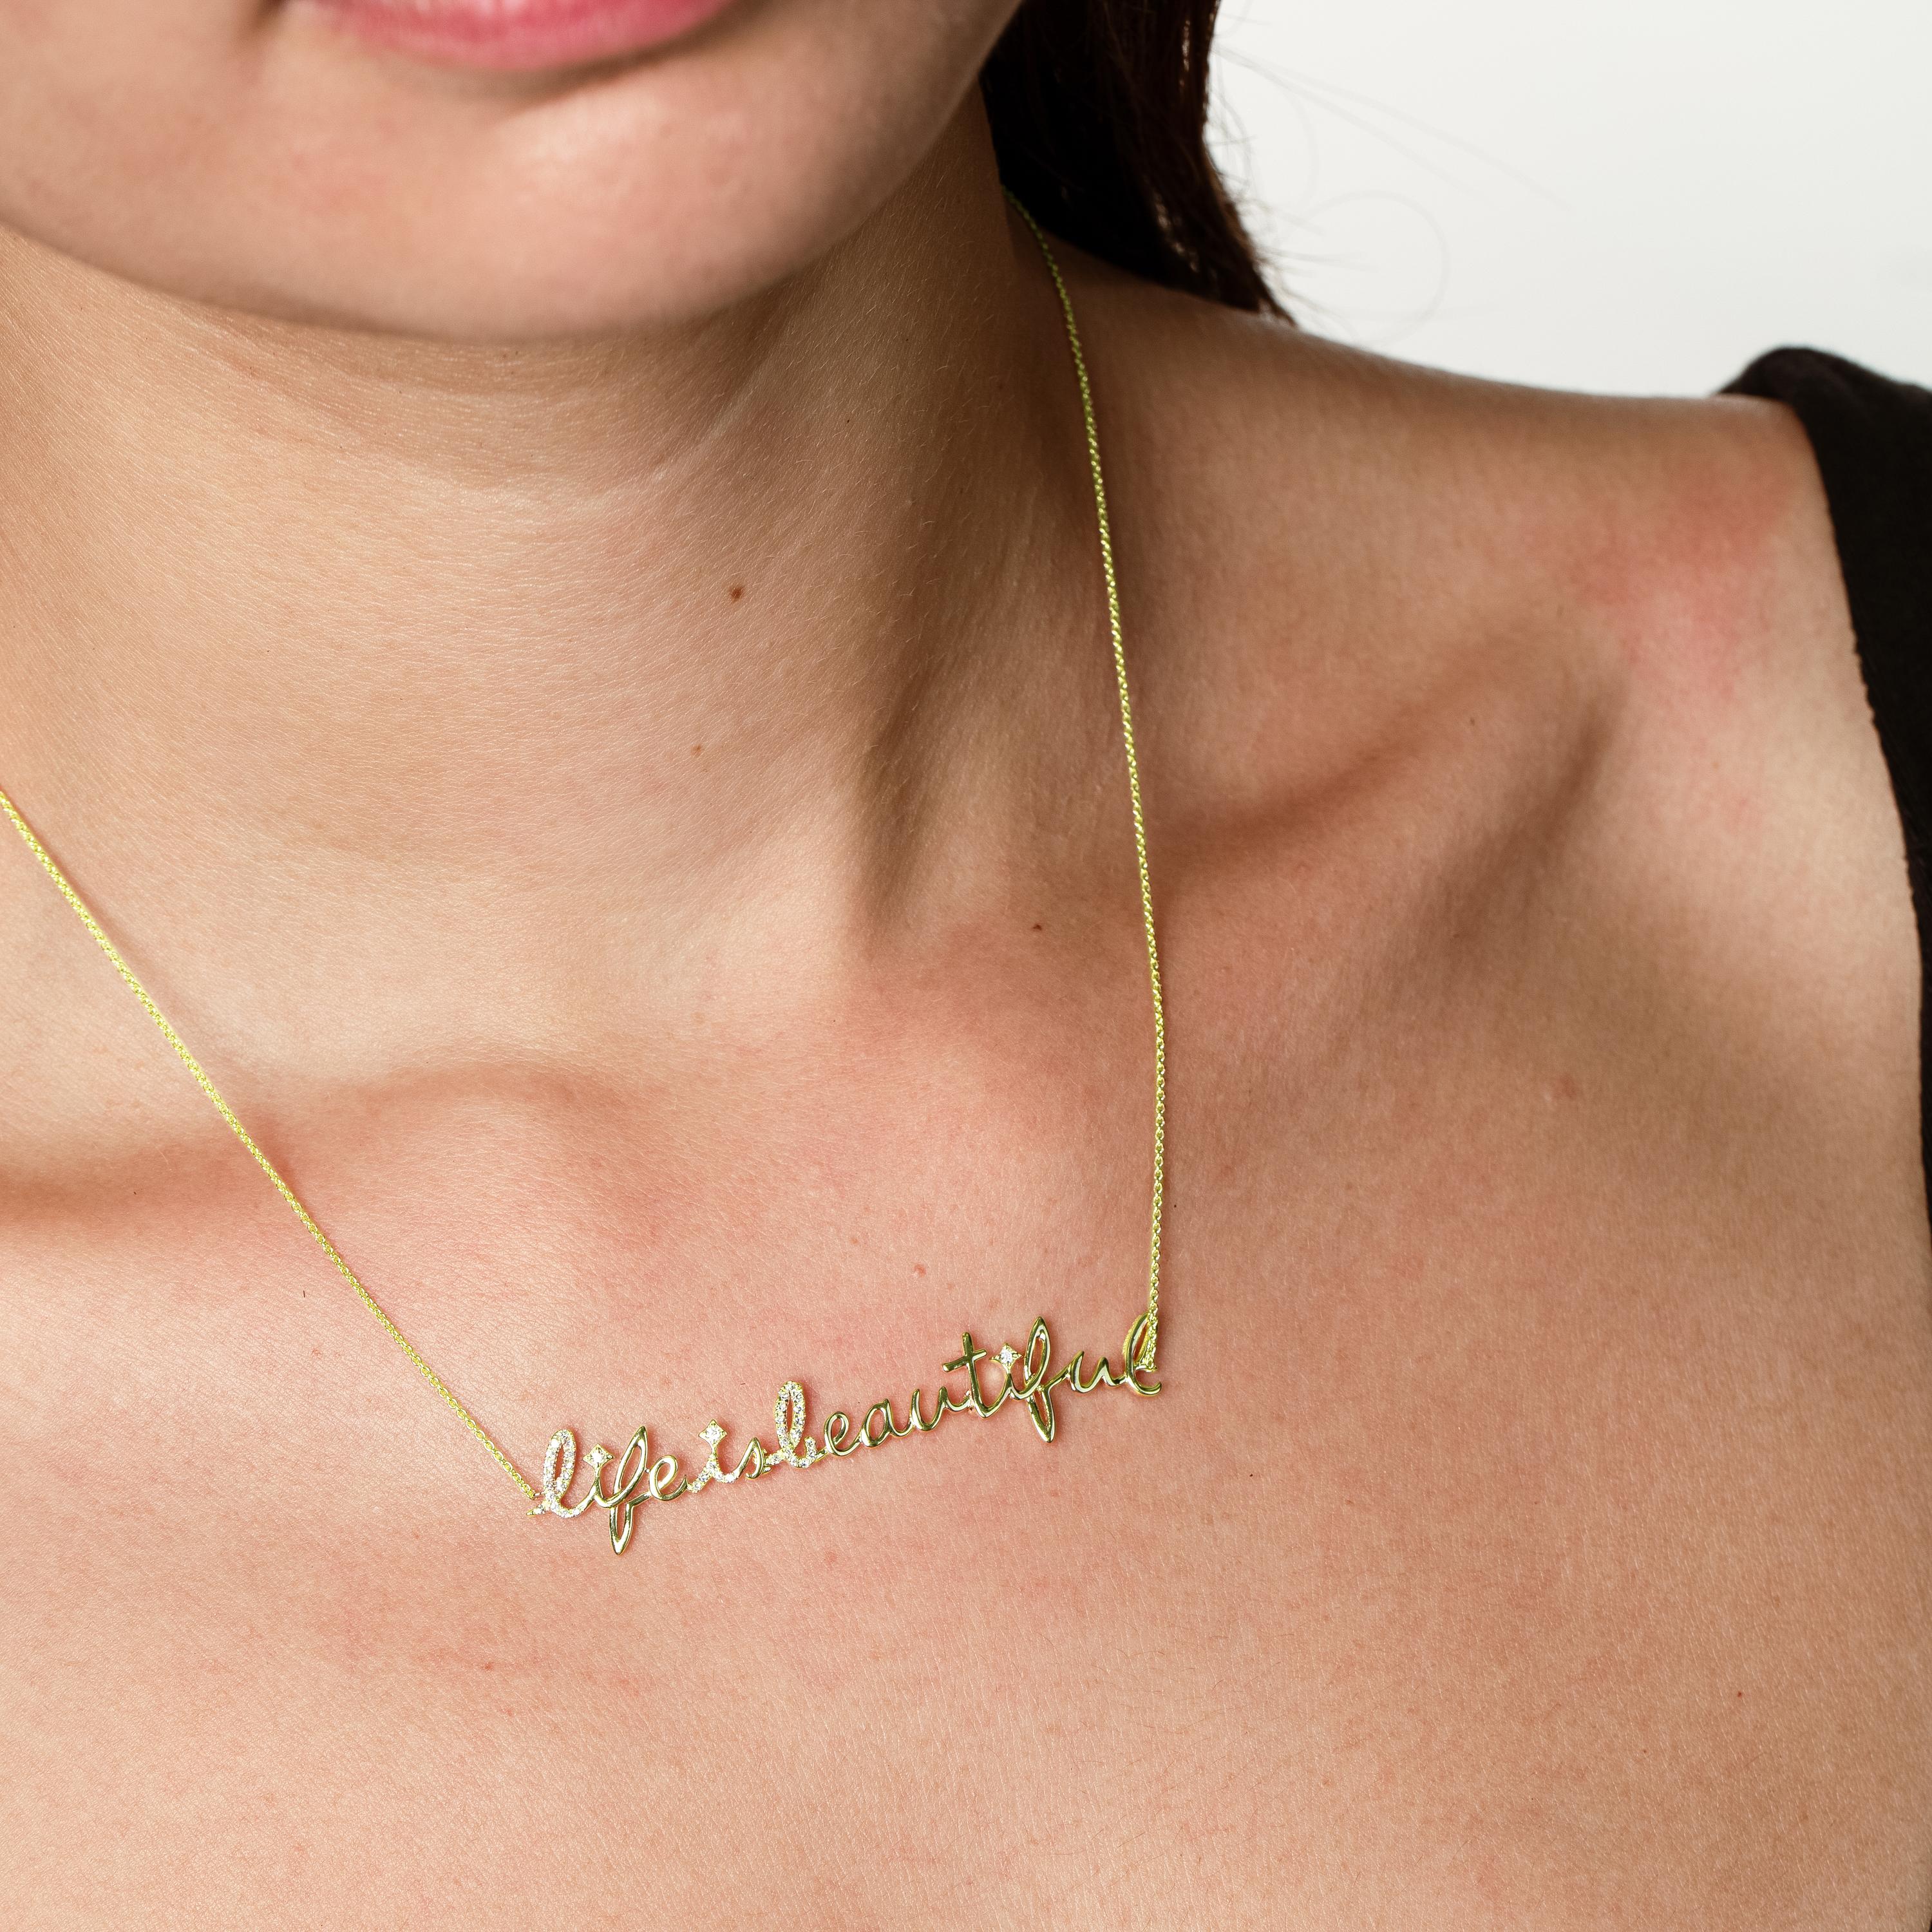 life is beautiful necklace